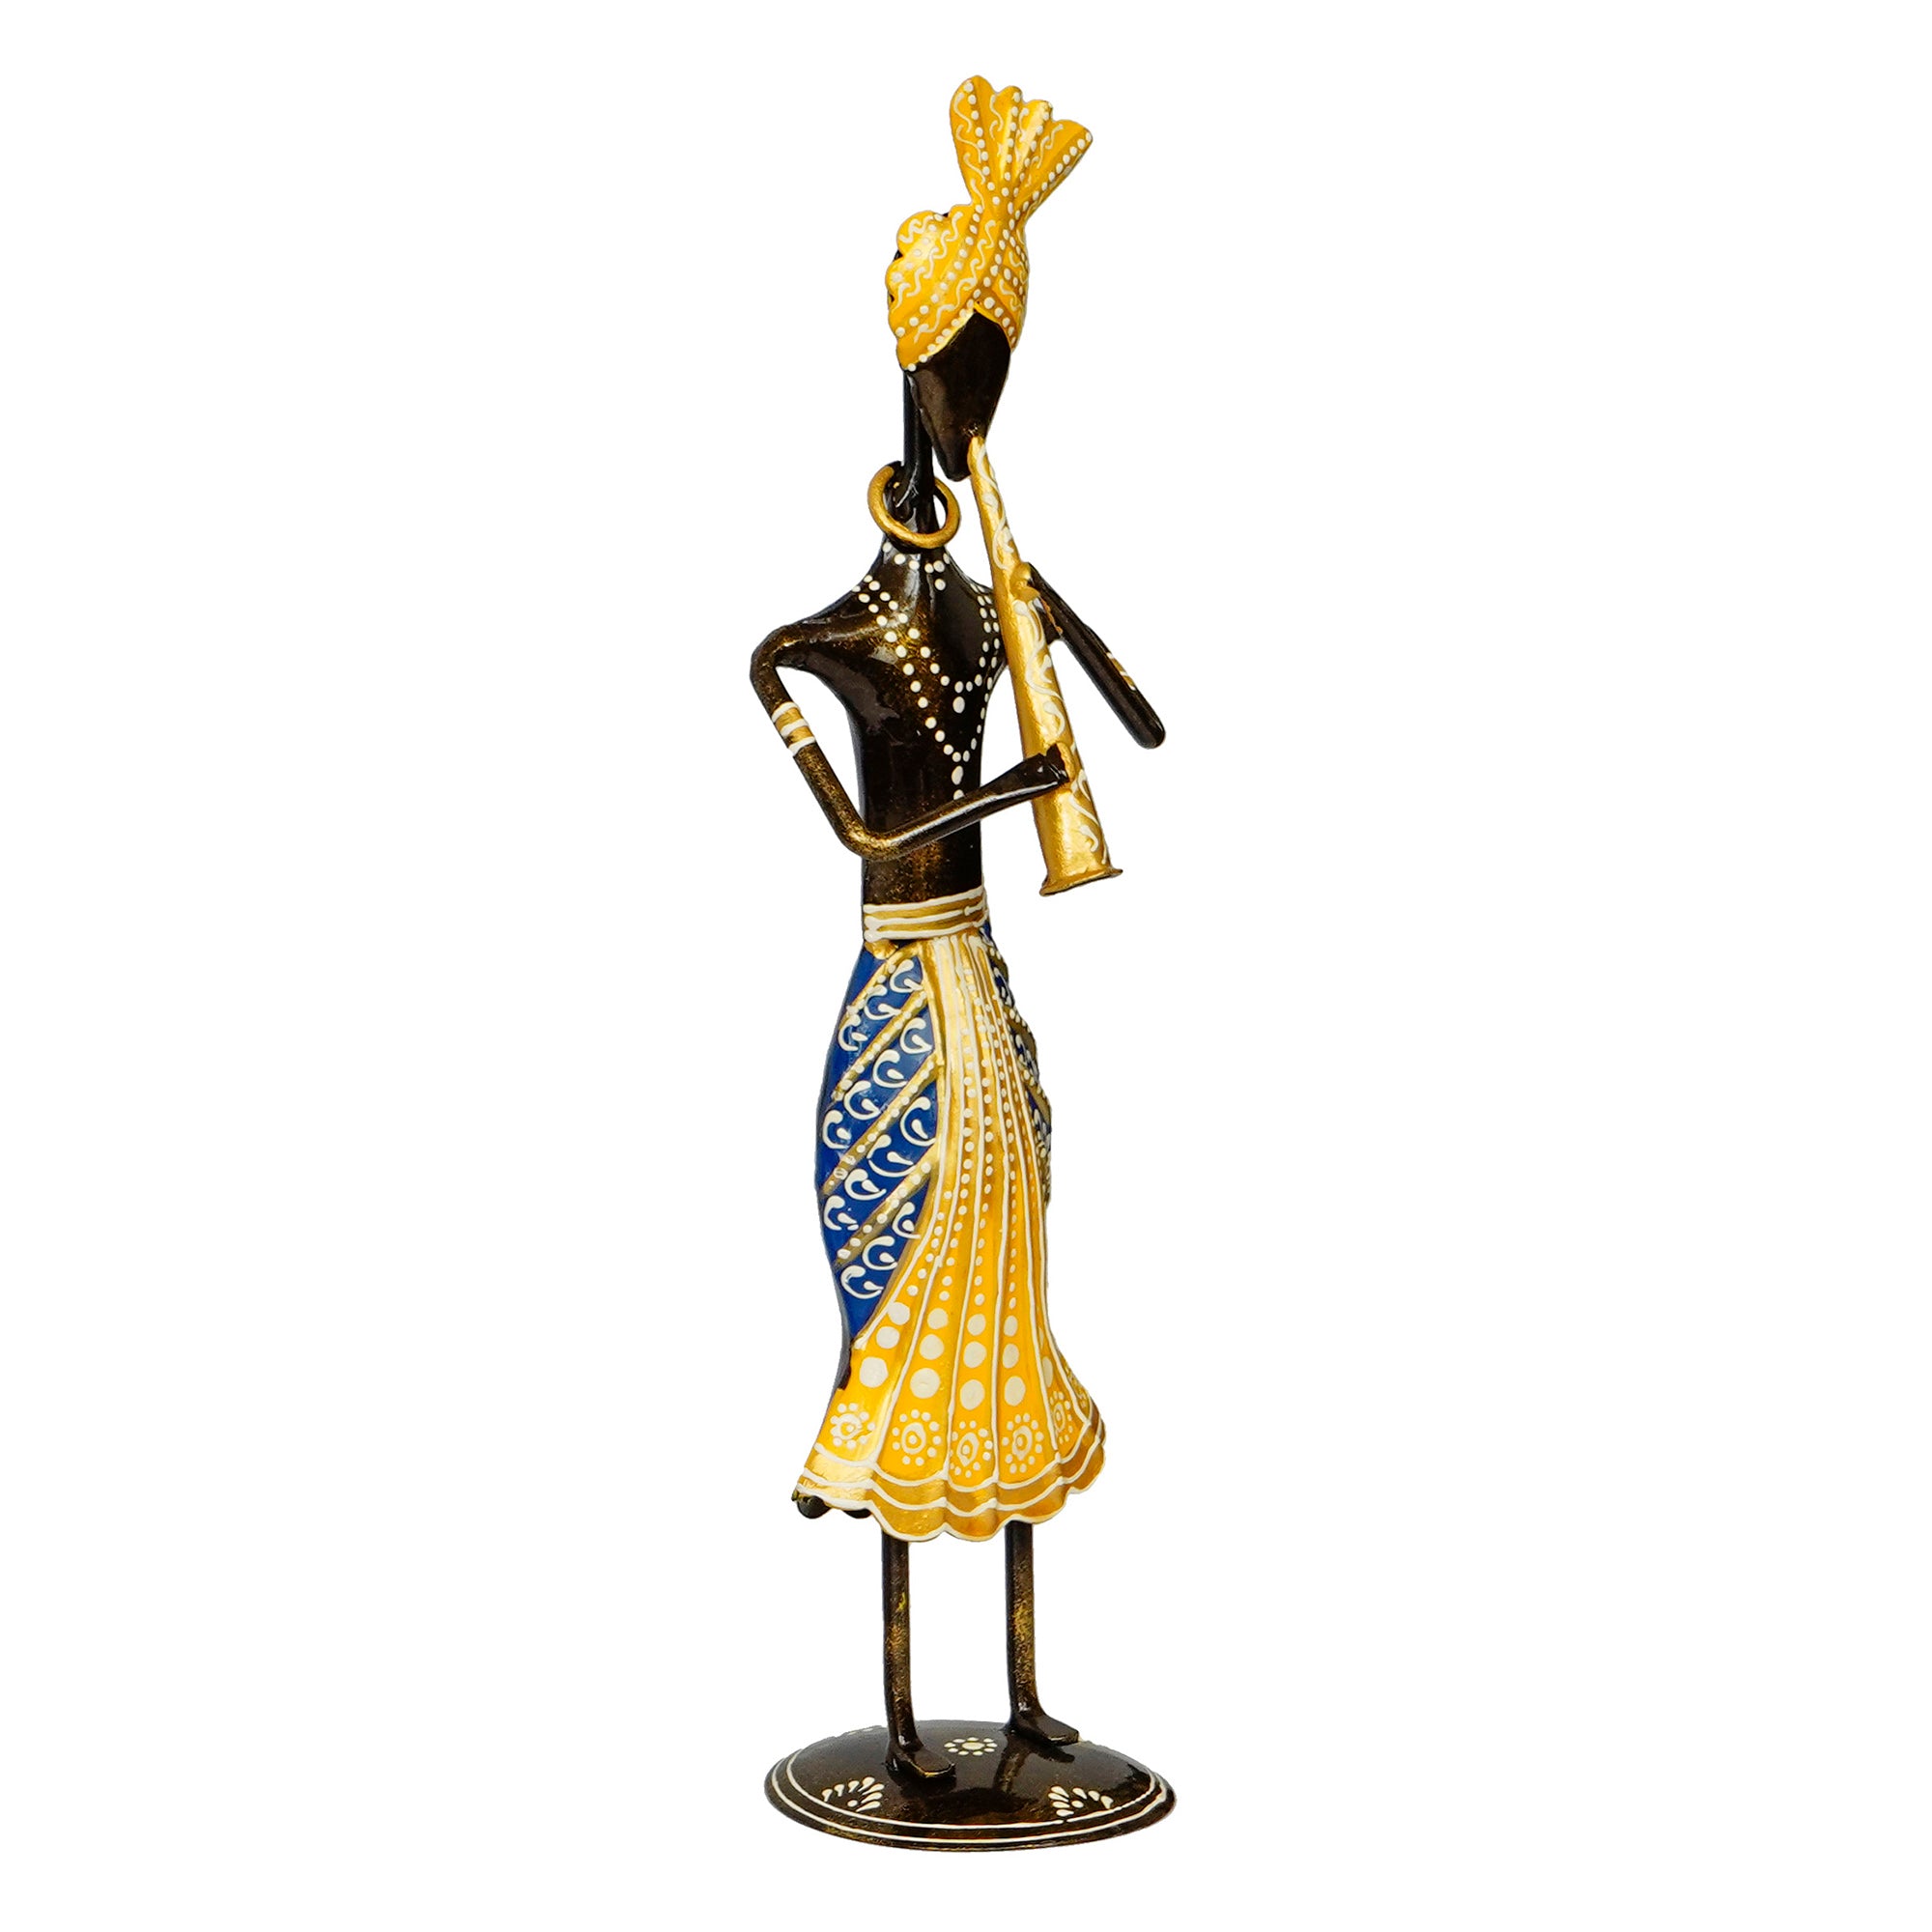 Iron Tribal Man Figurine Playing Trumpet Musical Instrument Decorative Showpiece (Black, Yellow and Blue) 5